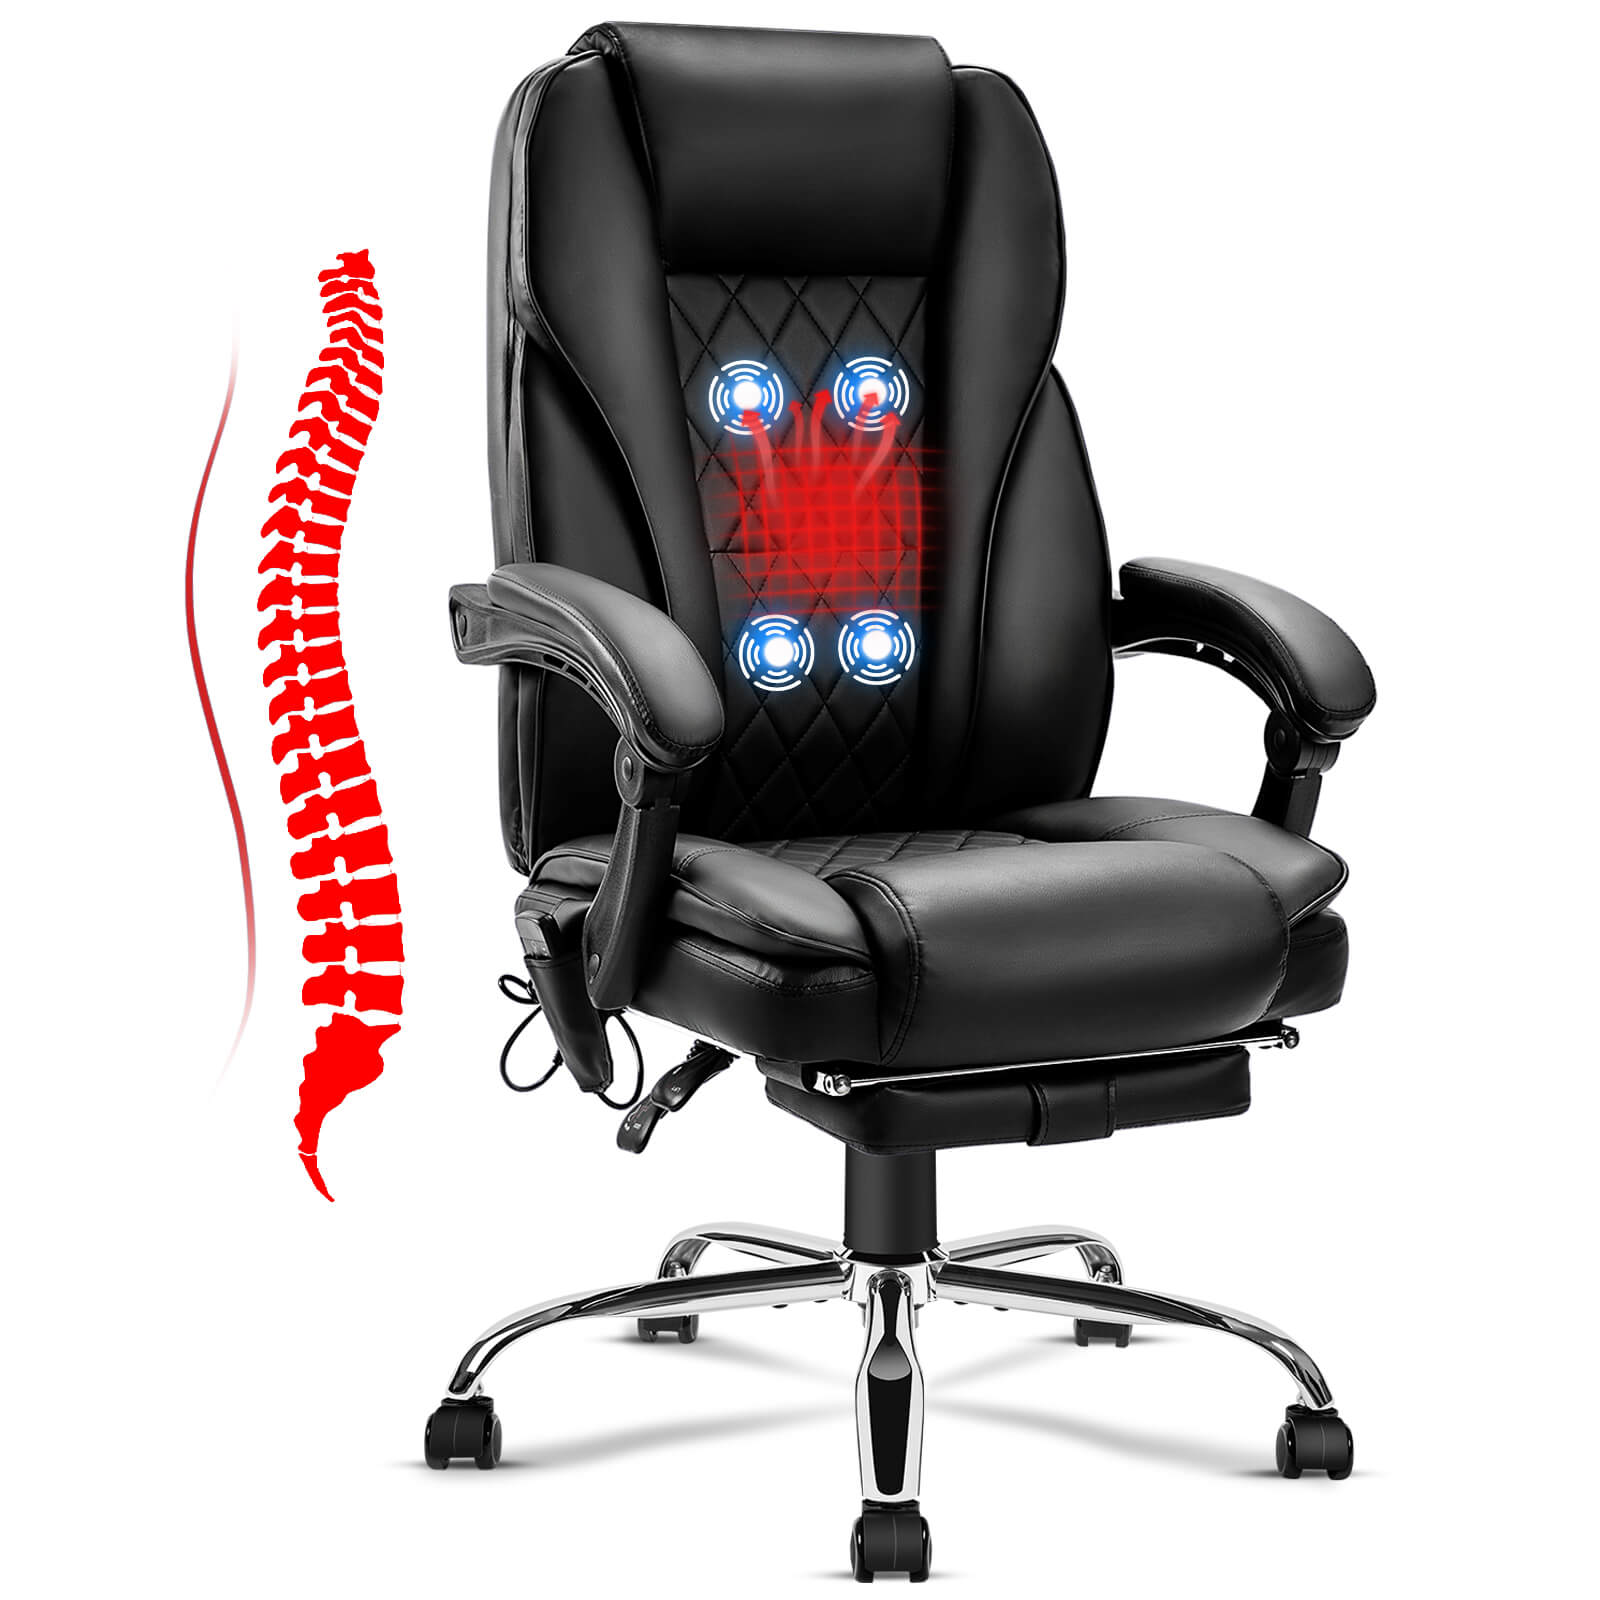 Ergonomic Office Chair with Heated Massage, High Back Fabric